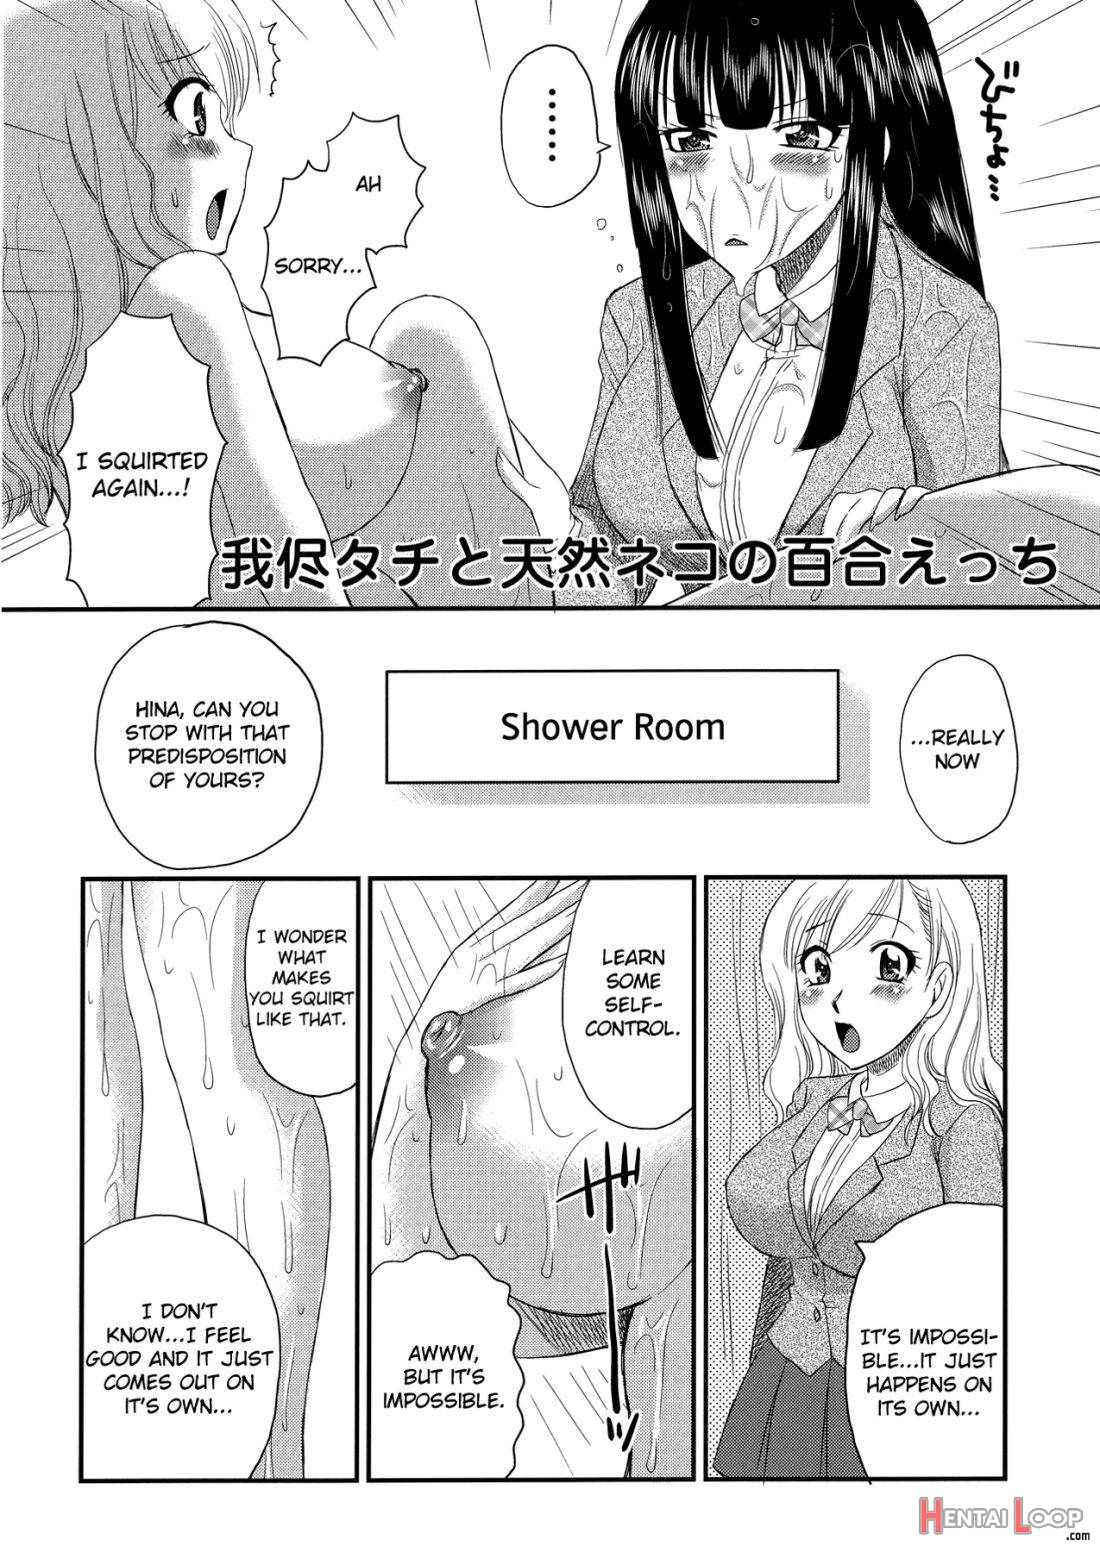 Selfish Top And Airheaded Bottom’s Yuri Smut 2 page 3